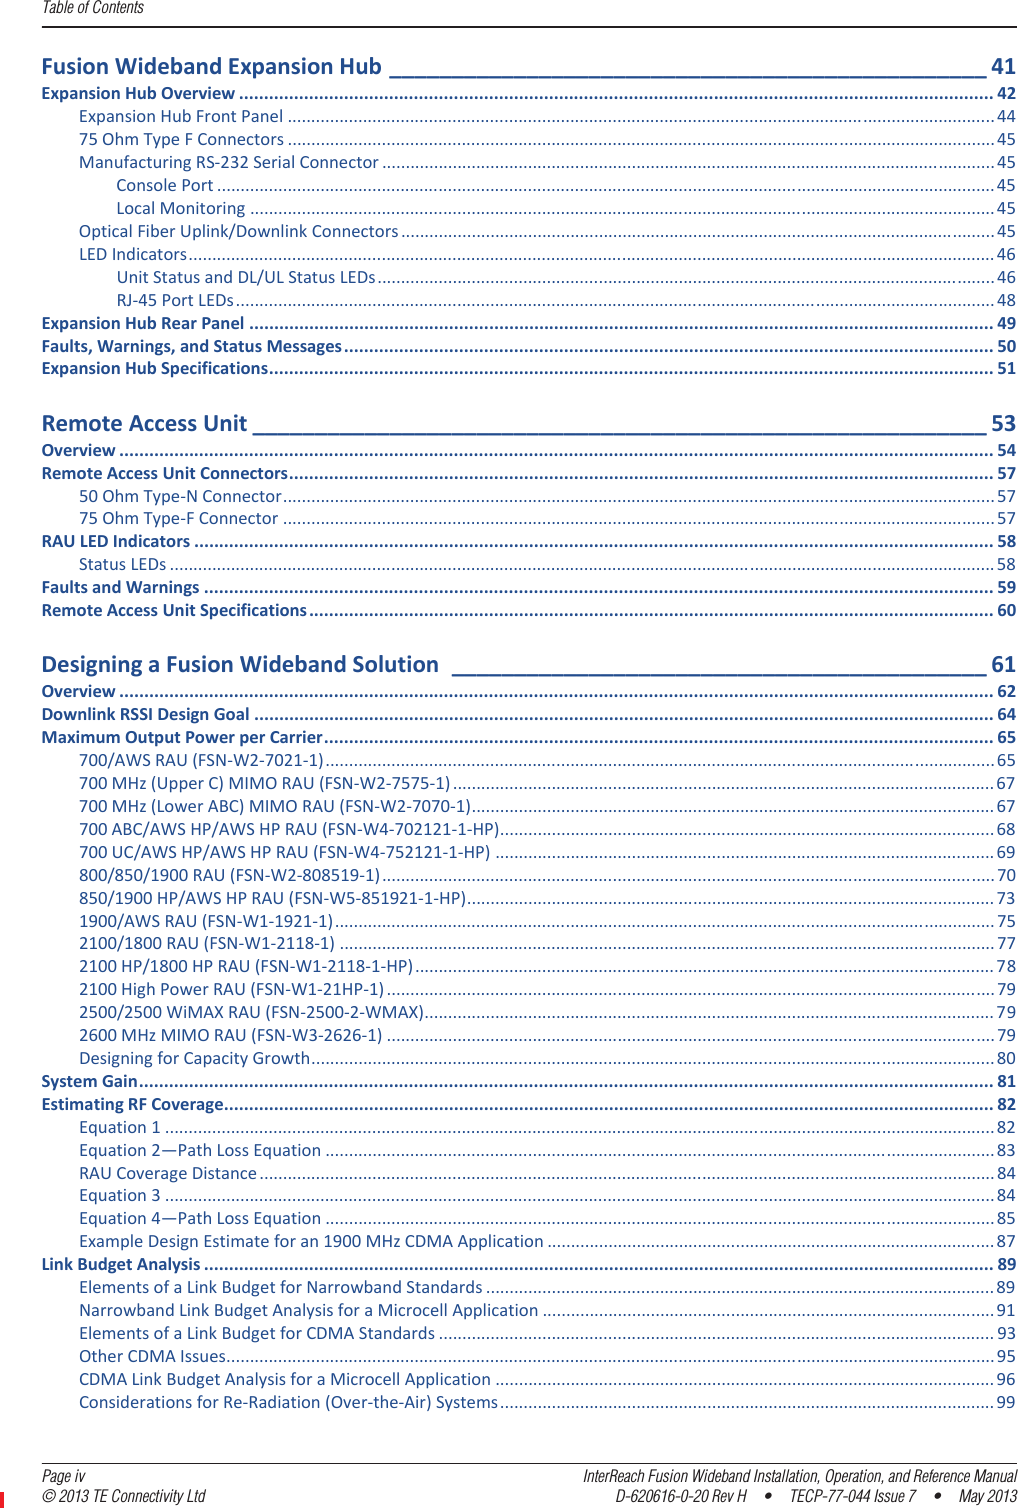 Table of Contents  Page iv InterReach Fusion Wideband Installation, Operation, and Reference Manual© 2013 TE Connectivity Ltd D-620616-0-20 Rev H  •  TECP-77-044 Issue 7  •  May 2013FusionWidebandExpansionHub ________________________________________________ 41ExpansionHubOverview ....................................................................................................................................................... 42ExpansionHubFrontPanel ...................................................................................................................................................... 4475OhmTypeFConnectors ......................................................................................................................................................45ManufacturingRSͲ232SerialConnector ..................................................................................................................................45ConsolePort ..................................................................................................................................................................... 45LocalMonitoring .............................................................................................................................................................. 45OpticalFiberUplink/DownlinkConnectors .............................................................................................................................. 45LEDIndicators........................................................................................................................................................................... 46UnitStatusandDL/ULStatusLEDs................................................................................................................................... 46RJͲ45PortLEDs................................................................................................................................................................. 48ExpansionHubRearPanel ..................................................................................................................................................... 49Faults,Warnings,andStatusMessages.................................................................................................................................. 50ExpansionHubSpecifications................................................................................................................................................. 51RemoteAccessUnit ___________________________________________________________ 53Overview ............................................................................................................................................................................... 54RemoteAccessUnitConnectors............................................................................................................................................. 5750OhmTypeͲNConnector....................................................................................................................................................... 5775OhmTypeͲFConnector ....................................................................................................................................................... 57RAULEDIndicators ................................................................................................................................................................ 58StatusLEDs ............................................................................................................................................................................... 58FaultsandWarnings .............................................................................................................................................................. 59RemoteAccessUnitSpecifications......................................................................................................................................... 60DesigningaFusionWidebandSolution ___________________________________________ 61Overview ............................................................................................................................................................................... 62DownlinkRSSIDesignGoal .................................................................................................................................................... 64MaximumOutputPowerperCarrier...................................................................................................................................... 65700/AWSRAU(FSNͲW2Ͳ7021Ͳ1)..............................................................................................................................................65700MHz(UpperC)MIMORAU(FSNͲW2Ͳ7575Ͳ1) ................................................................................................................... 67700MHz(LowerABC)MIMORAU(FSNͲW2Ͳ7070Ͳ1)............................................................................................................... 67700ABC/AWSHP/AWSHPRAU(FSNͲW4Ͳ702121Ͳ1ͲHP)......................................................................................................... 68700UC/AWSHP/AWSHPRAU(FSNͲW4Ͳ752121Ͳ1ͲHP) .......................................................................................................... 69800/850/1900RAU(FSNͲW2Ͳ808519Ͳ1).................................................................................................................................. 70850/1900HP/AWSHPRAU(FSNͲW5Ͳ851921Ͳ1ͲHP)................................................................................................................ 731900/AWSRAU(FSNͲW1Ͳ1921Ͳ1)............................................................................................................................................ 752100/1800RAU(FSNͲW1Ͳ2118Ͳ1) ........................................................................................................................................... 772100HP/1800HPRAU(FSNͲW1Ͳ2118Ͳ1ͲHP) ........................................................................................................................... 782100HighPowerRAU(FSNͲW1Ͳ21HPͲ1) ................................................................................................................................. 792500/2500WiMAXRAU(FSNͲ2500Ͳ2ͲWMAX)......................................................................................................................... 792600MHzMIMORAU(FSNͲW3Ͳ2626Ͳ1) ................................................................................................................................. 79DesigningforCapacityGrowth................................................................................................................................................. 80SystemGain........................................................................................................................................................................... 81EstimatingRFCoverage.......................................................................................................................................................... 82Equation1 ................................................................................................................................................................................ 82Equation2—PathLossEquation ..............................................................................................................................................83RAUCoverageDistance ............................................................................................................................................................ 84Equation3 ................................................................................................................................................................................ 84Equation4—PathLossEquation ..............................................................................................................................................85ExampleDesignEstimateforan1900MHzCDMAApplication ............................................................................................... 87LinkBudgetAnalysis .............................................................................................................................................................. 89ElementsofaLinkBudgetforNarrowbandStandards ............................................................................................................ 89NarrowbandLinkBudgetAnalysisforaMicrocellApplication ................................................................................................ 91ElementsofaLinkBudgetforCDMAStandards ...................................................................................................................... 93OtherCDMAIssues................................................................................................................................................................... 95CDMALinkBudgetAnalysisforaMicrocellApplication .......................................................................................................... 96ConsiderationsforReͲRadiation(OverͲtheͲAir)Systems ......................................................................................................... 99